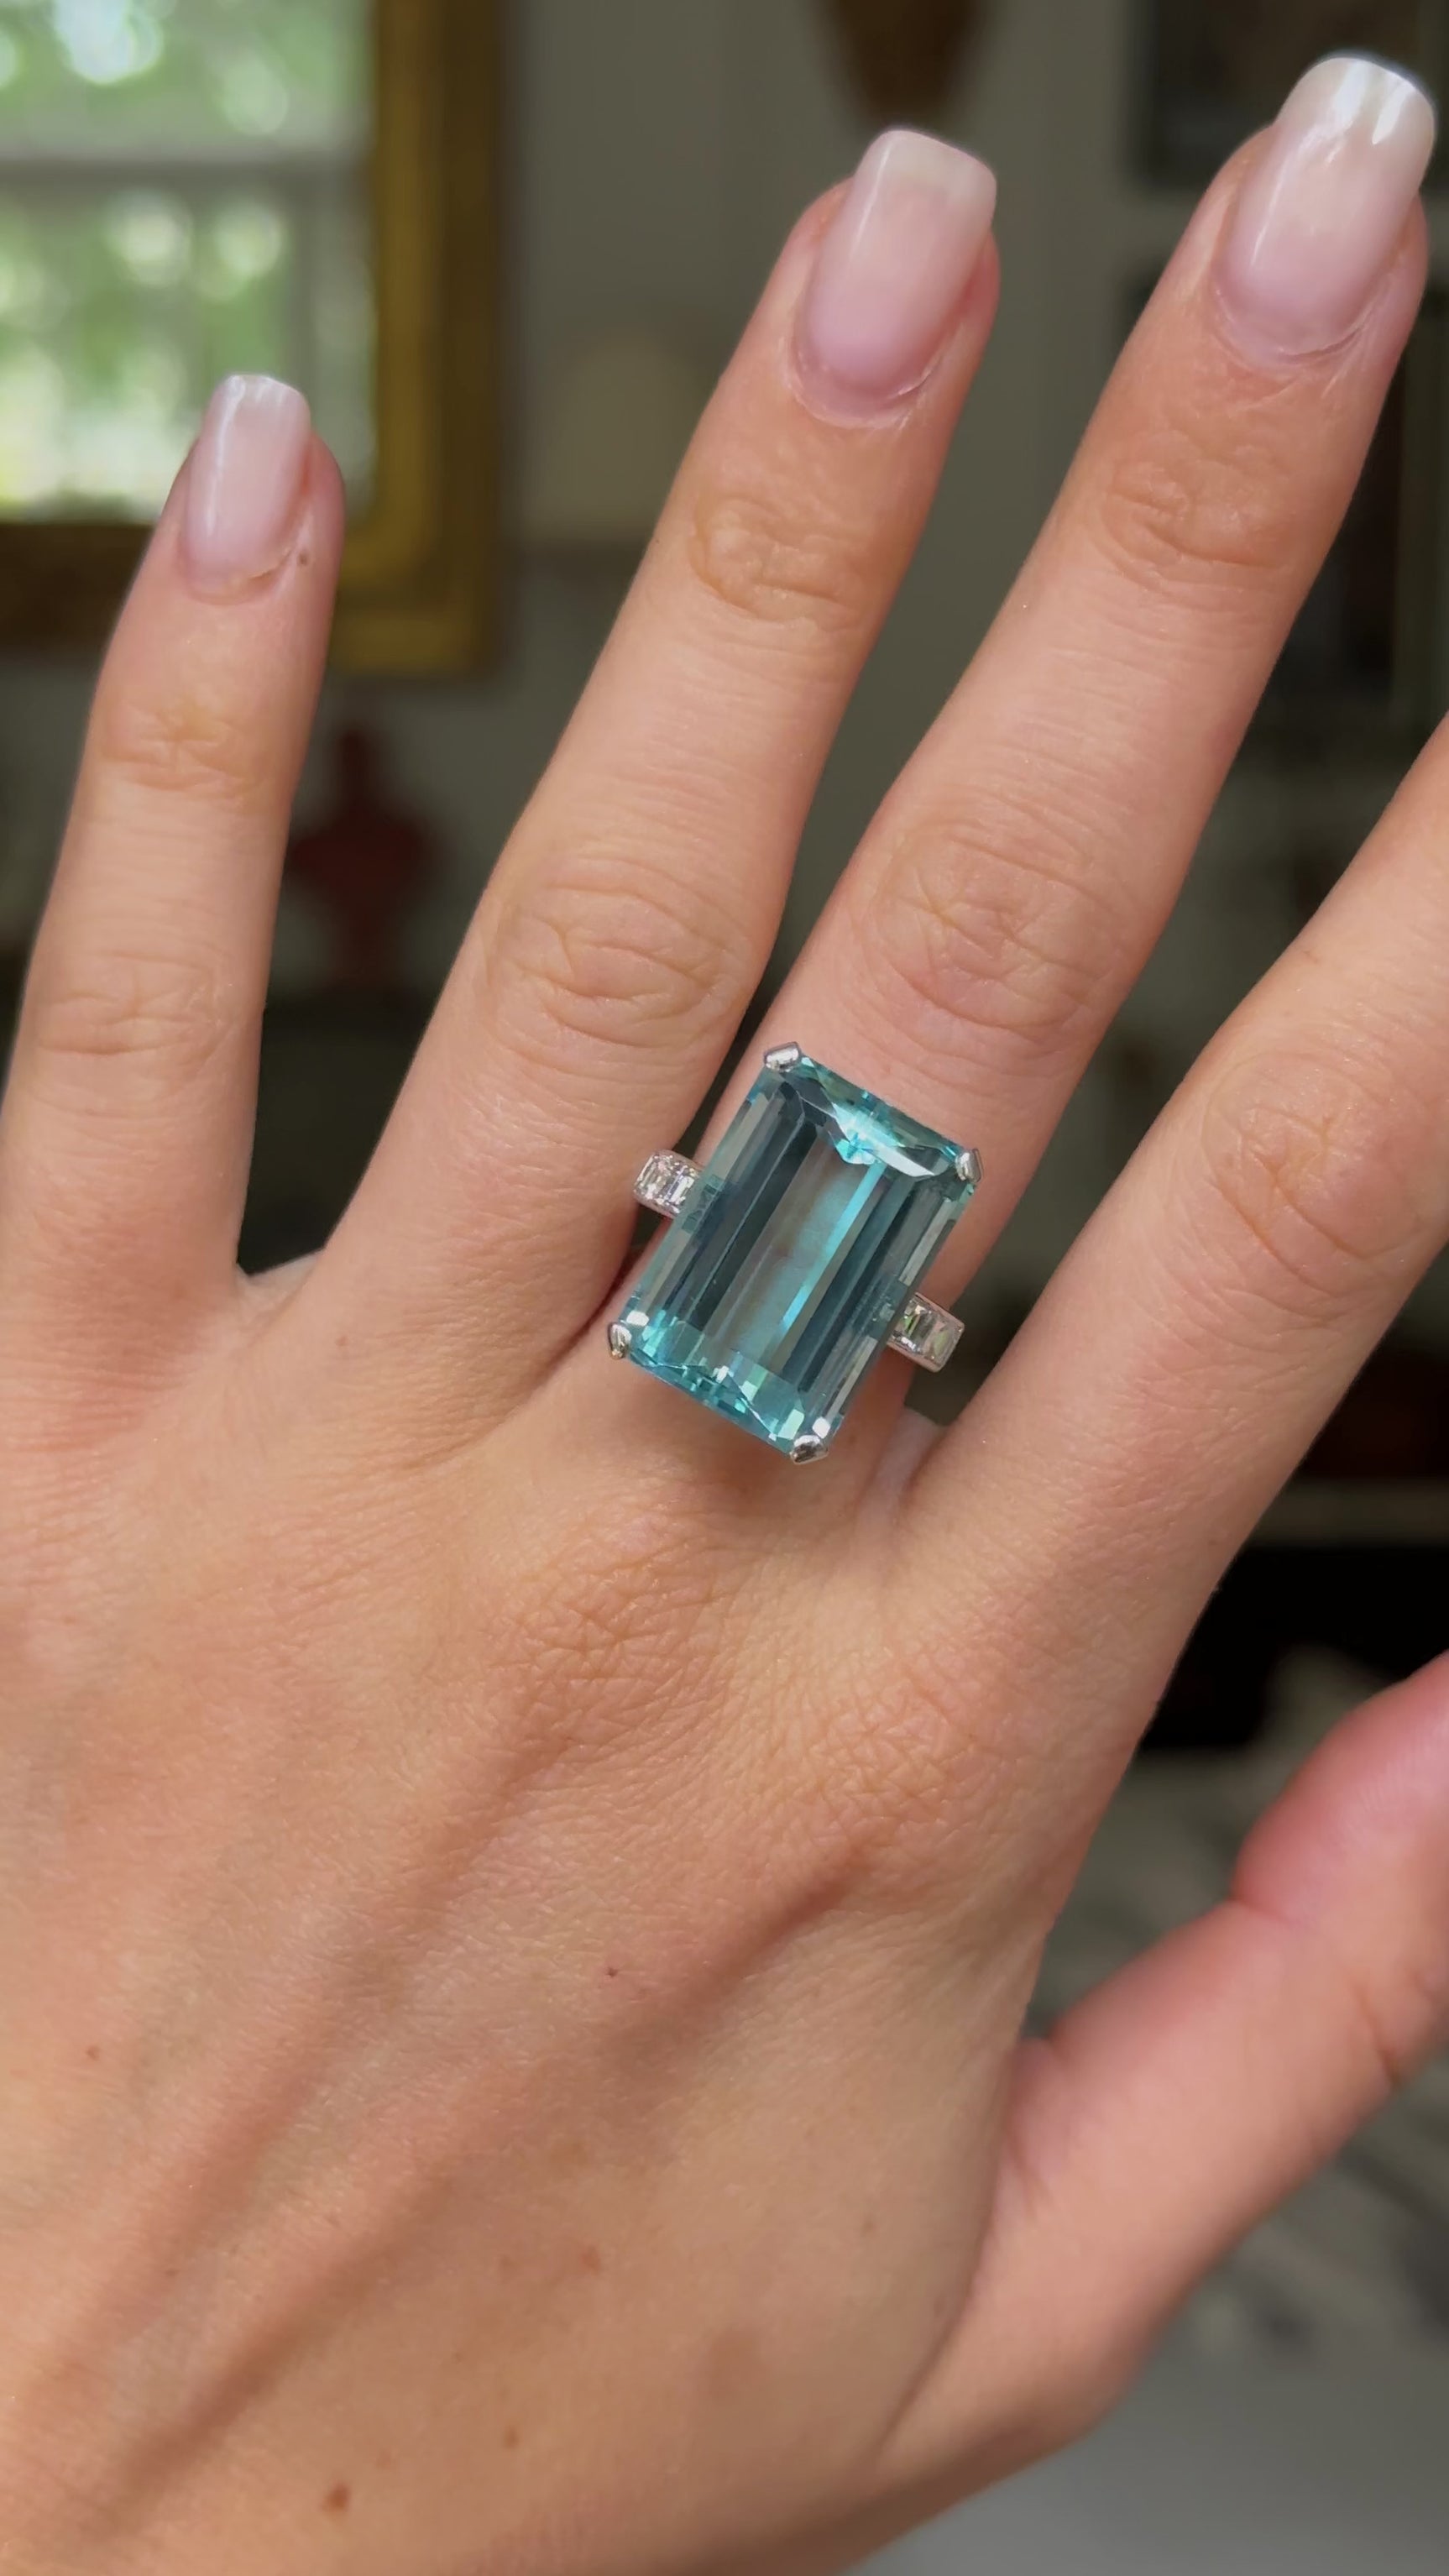 vintage aquamarine and diamond cocktail ring, worn on hand and moved around to give perspective.